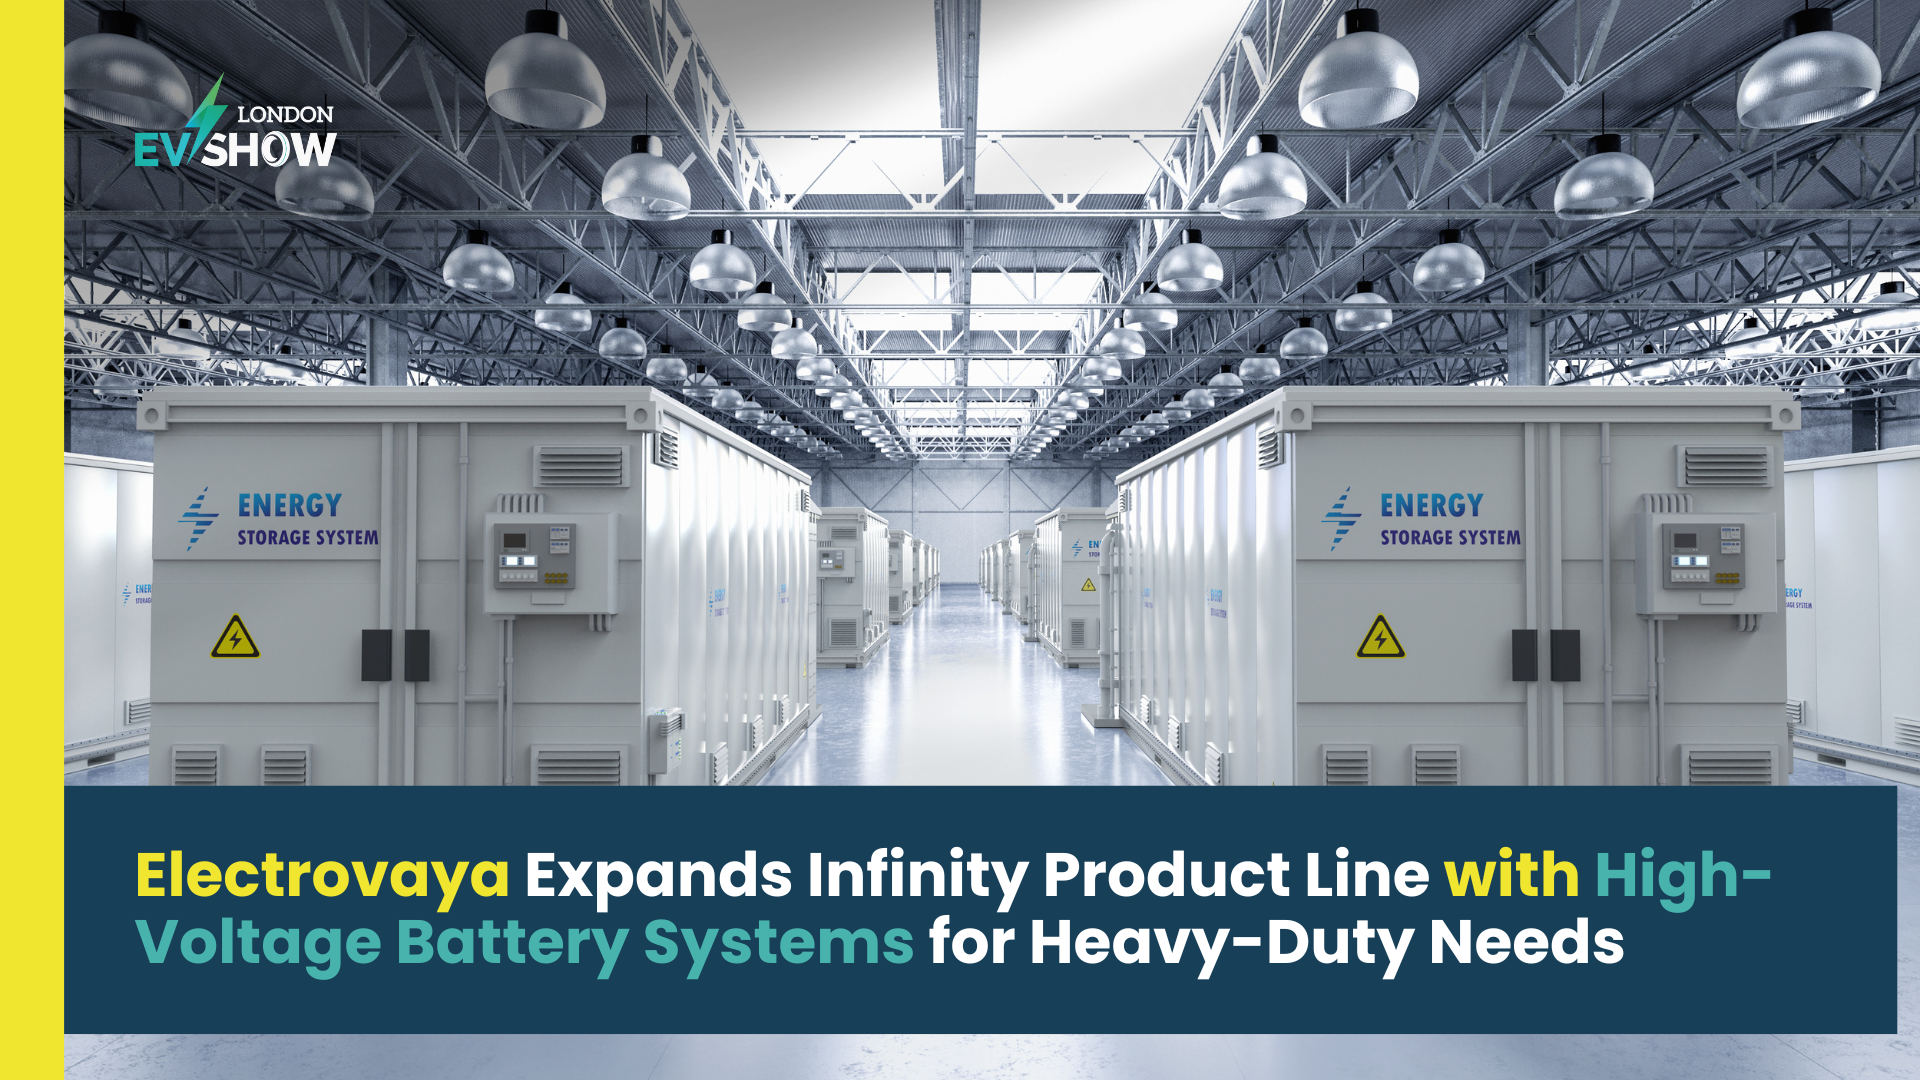 Electrovaya Expands Infinity Product Line with High-Voltage Battery Systems for Heavy-Duty Needs